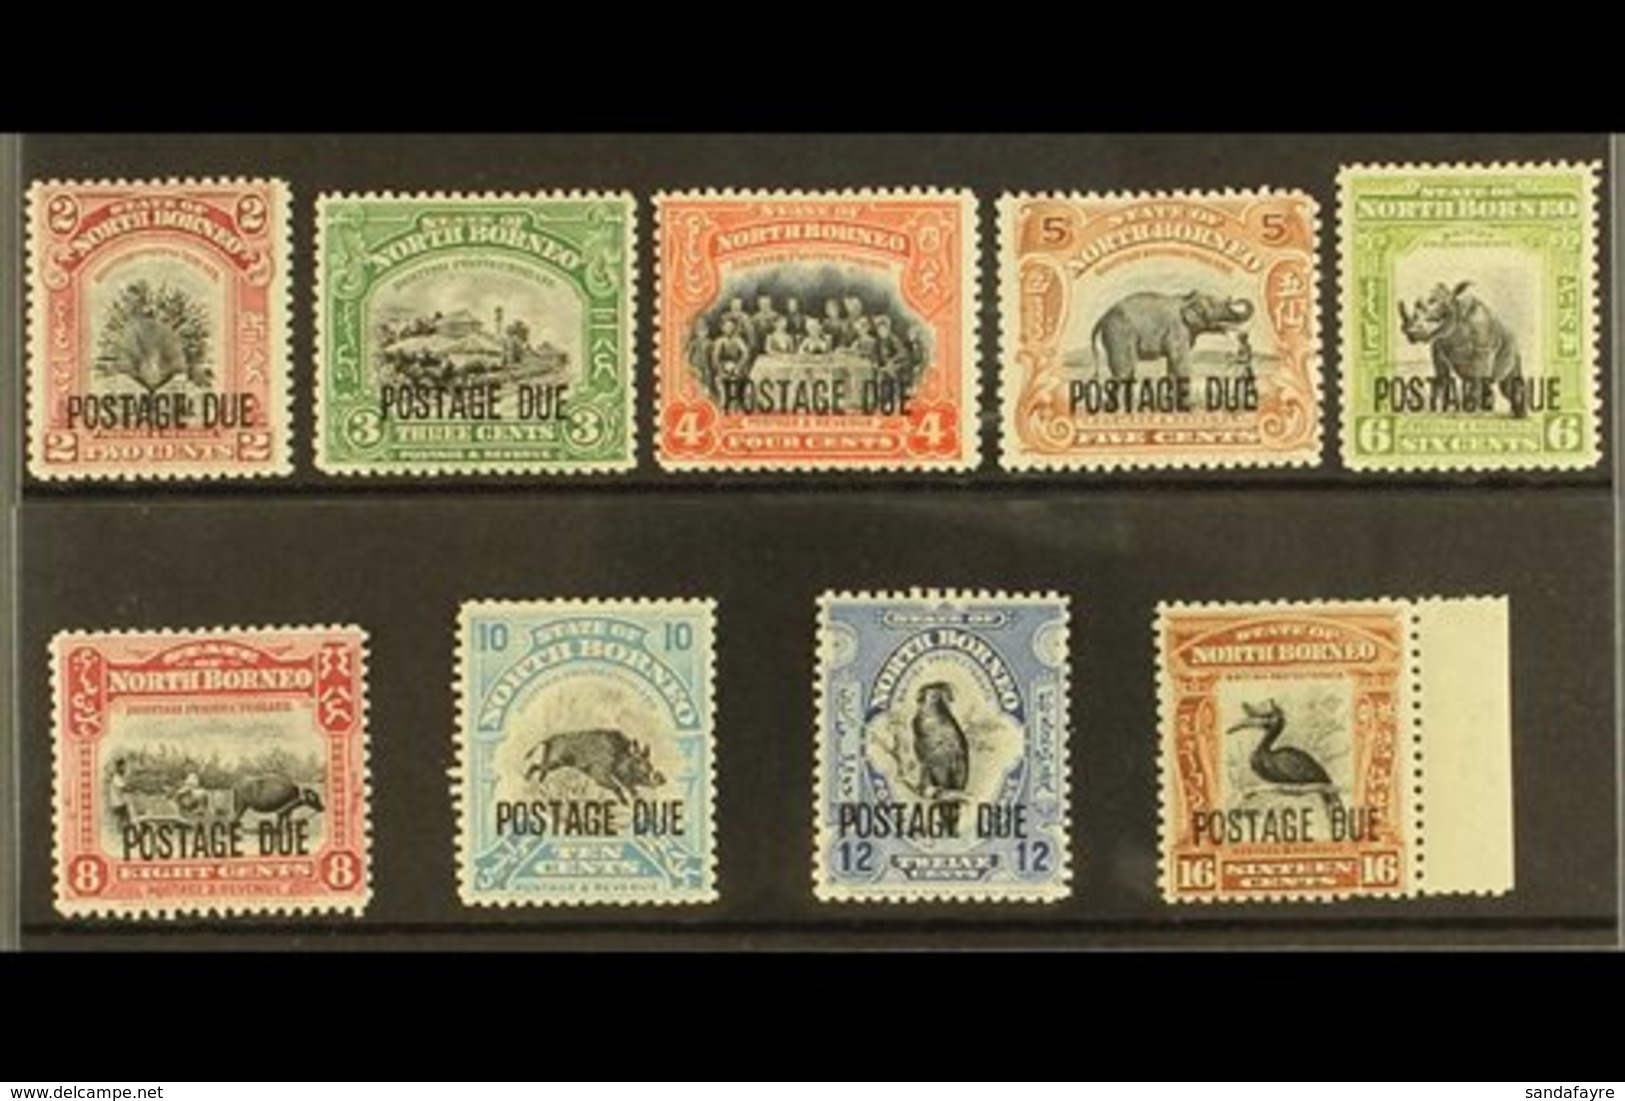 POSTAGE DUE  1930-38 Perf 12½ Complete Set, SG D76/84, Fresh Mint, The 6c & 10c Each With Small Hinge Thin. (9 Stamps) F - Noord Borneo (...-1963)